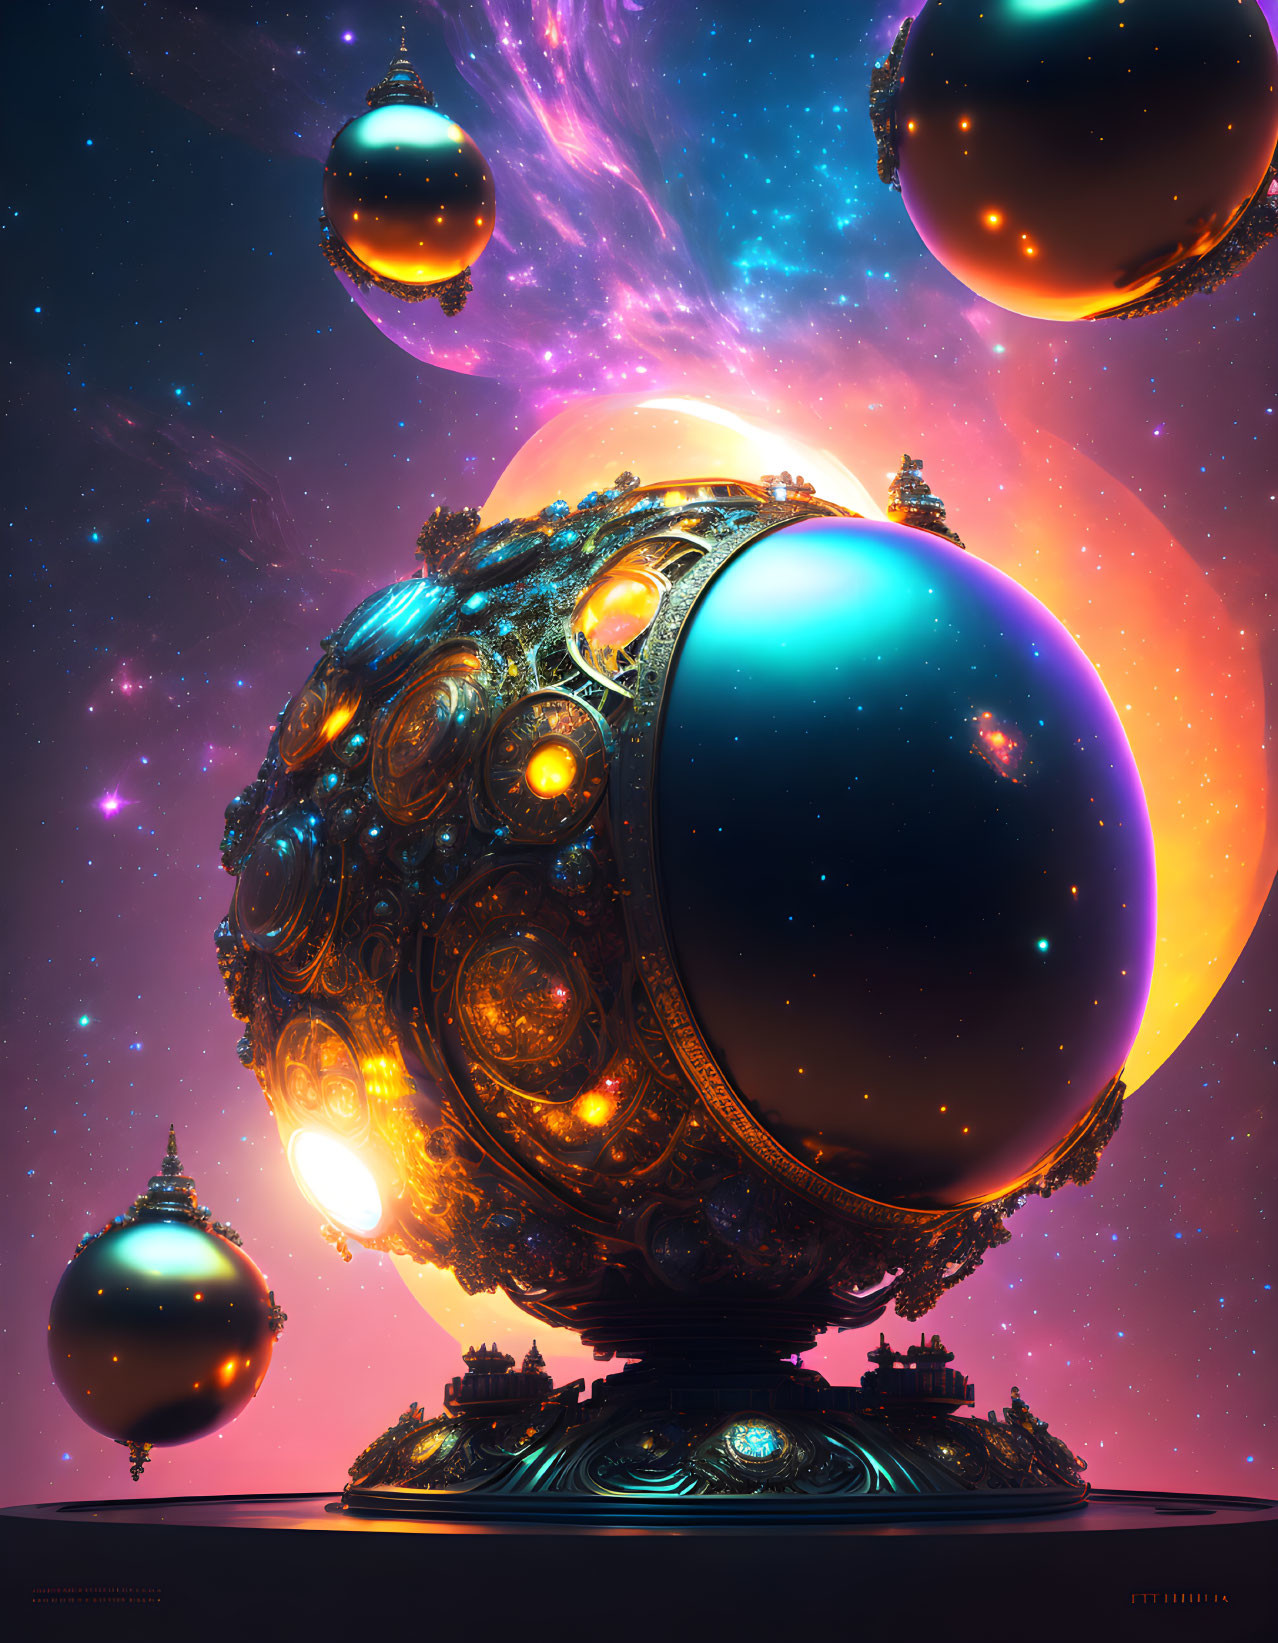 Colorful Sci-Fi Image: Large Glowing Sphere Amidst Cosmic Setting